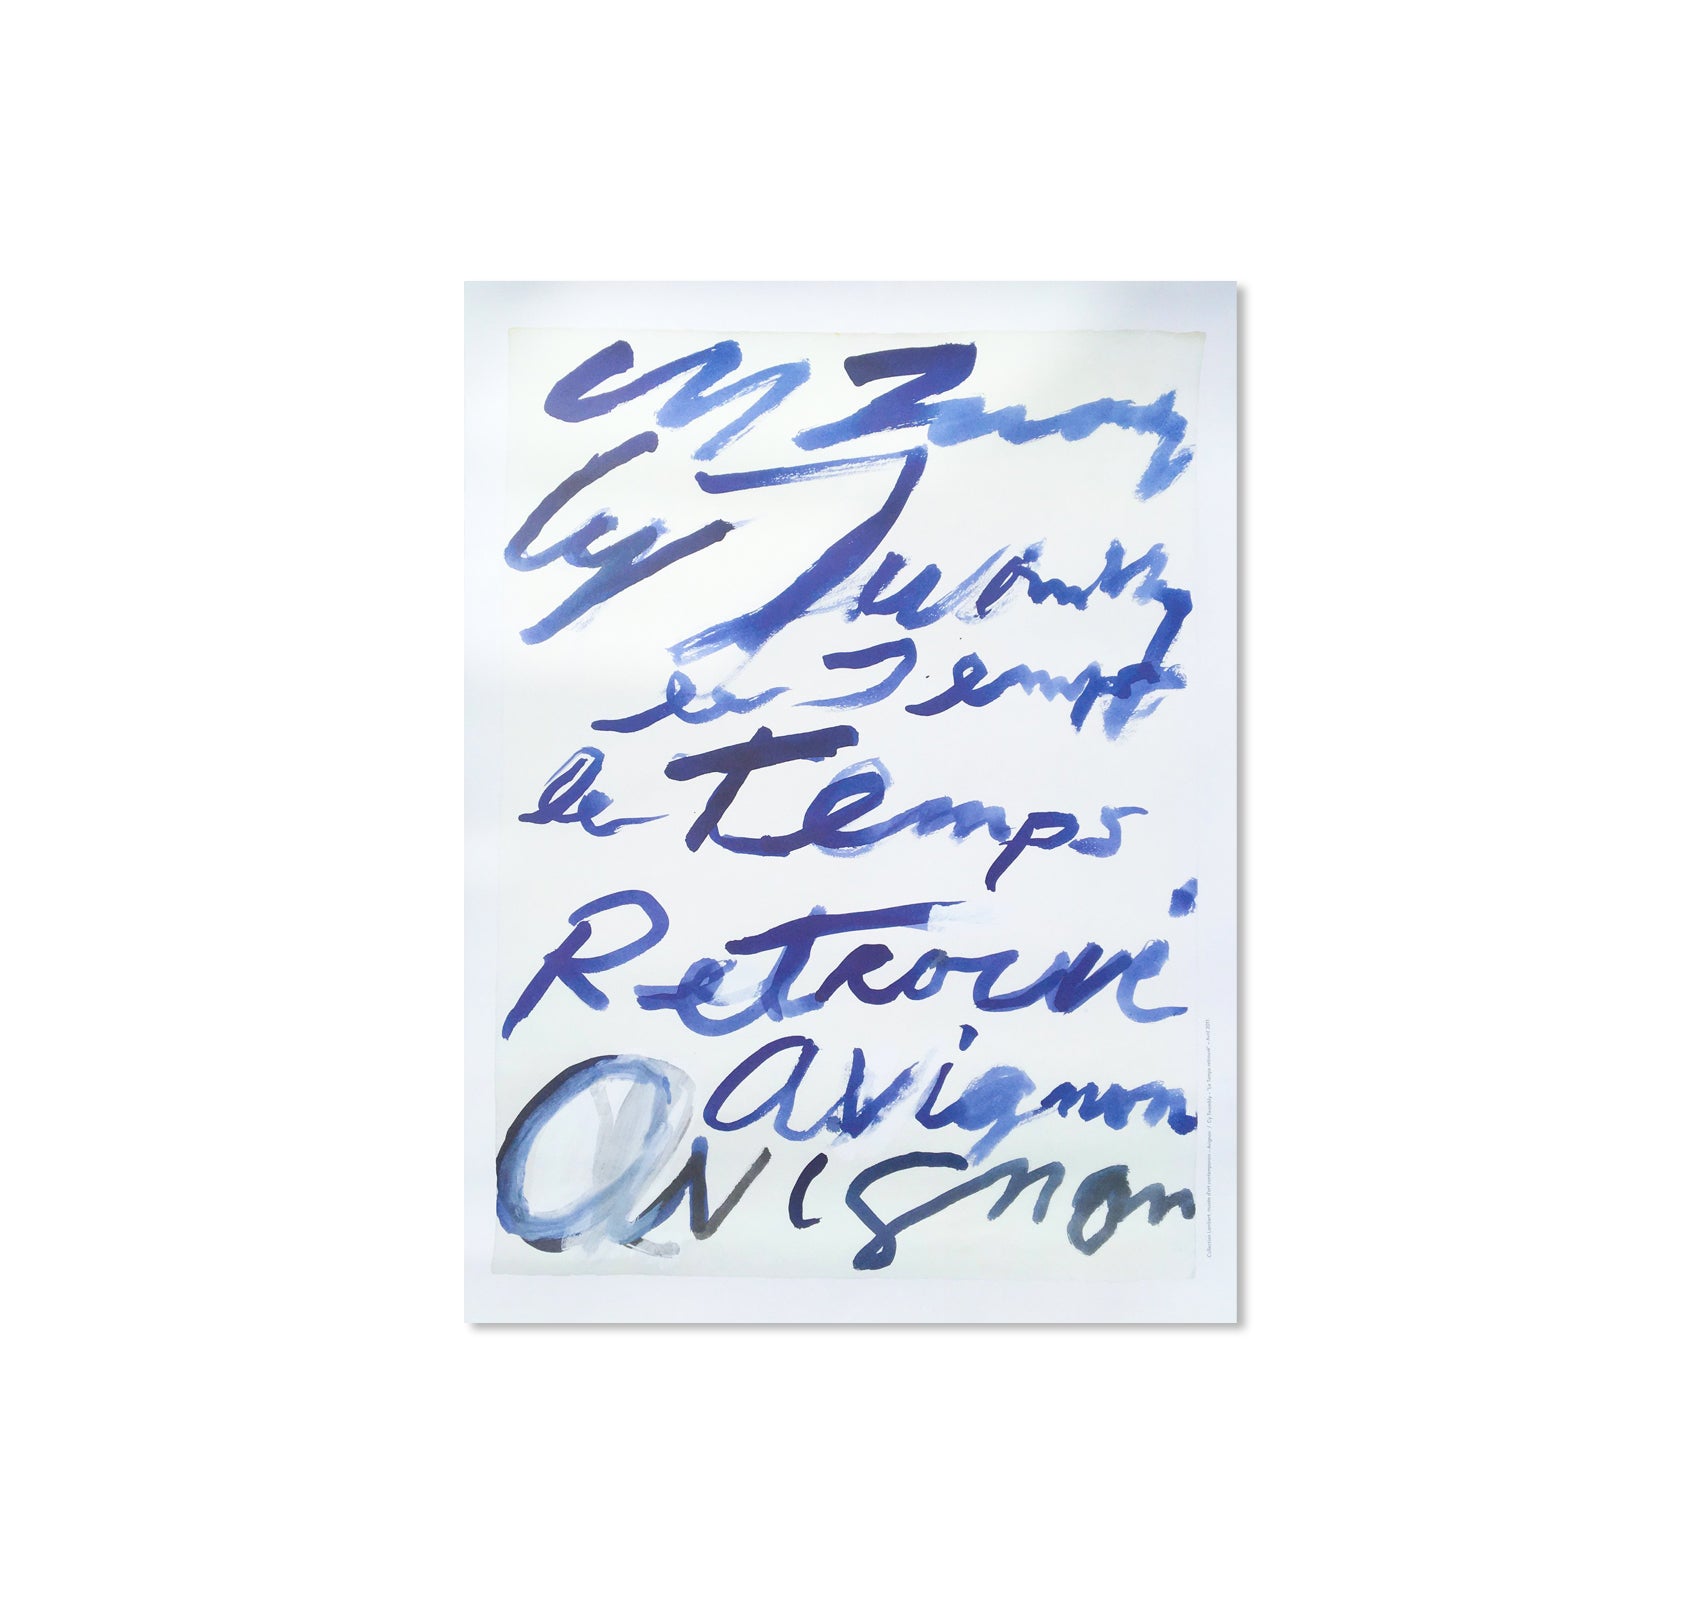 LE TEMPS RETROUVÉ (2011) by Cy Twombly [REPRINTED EDITION]